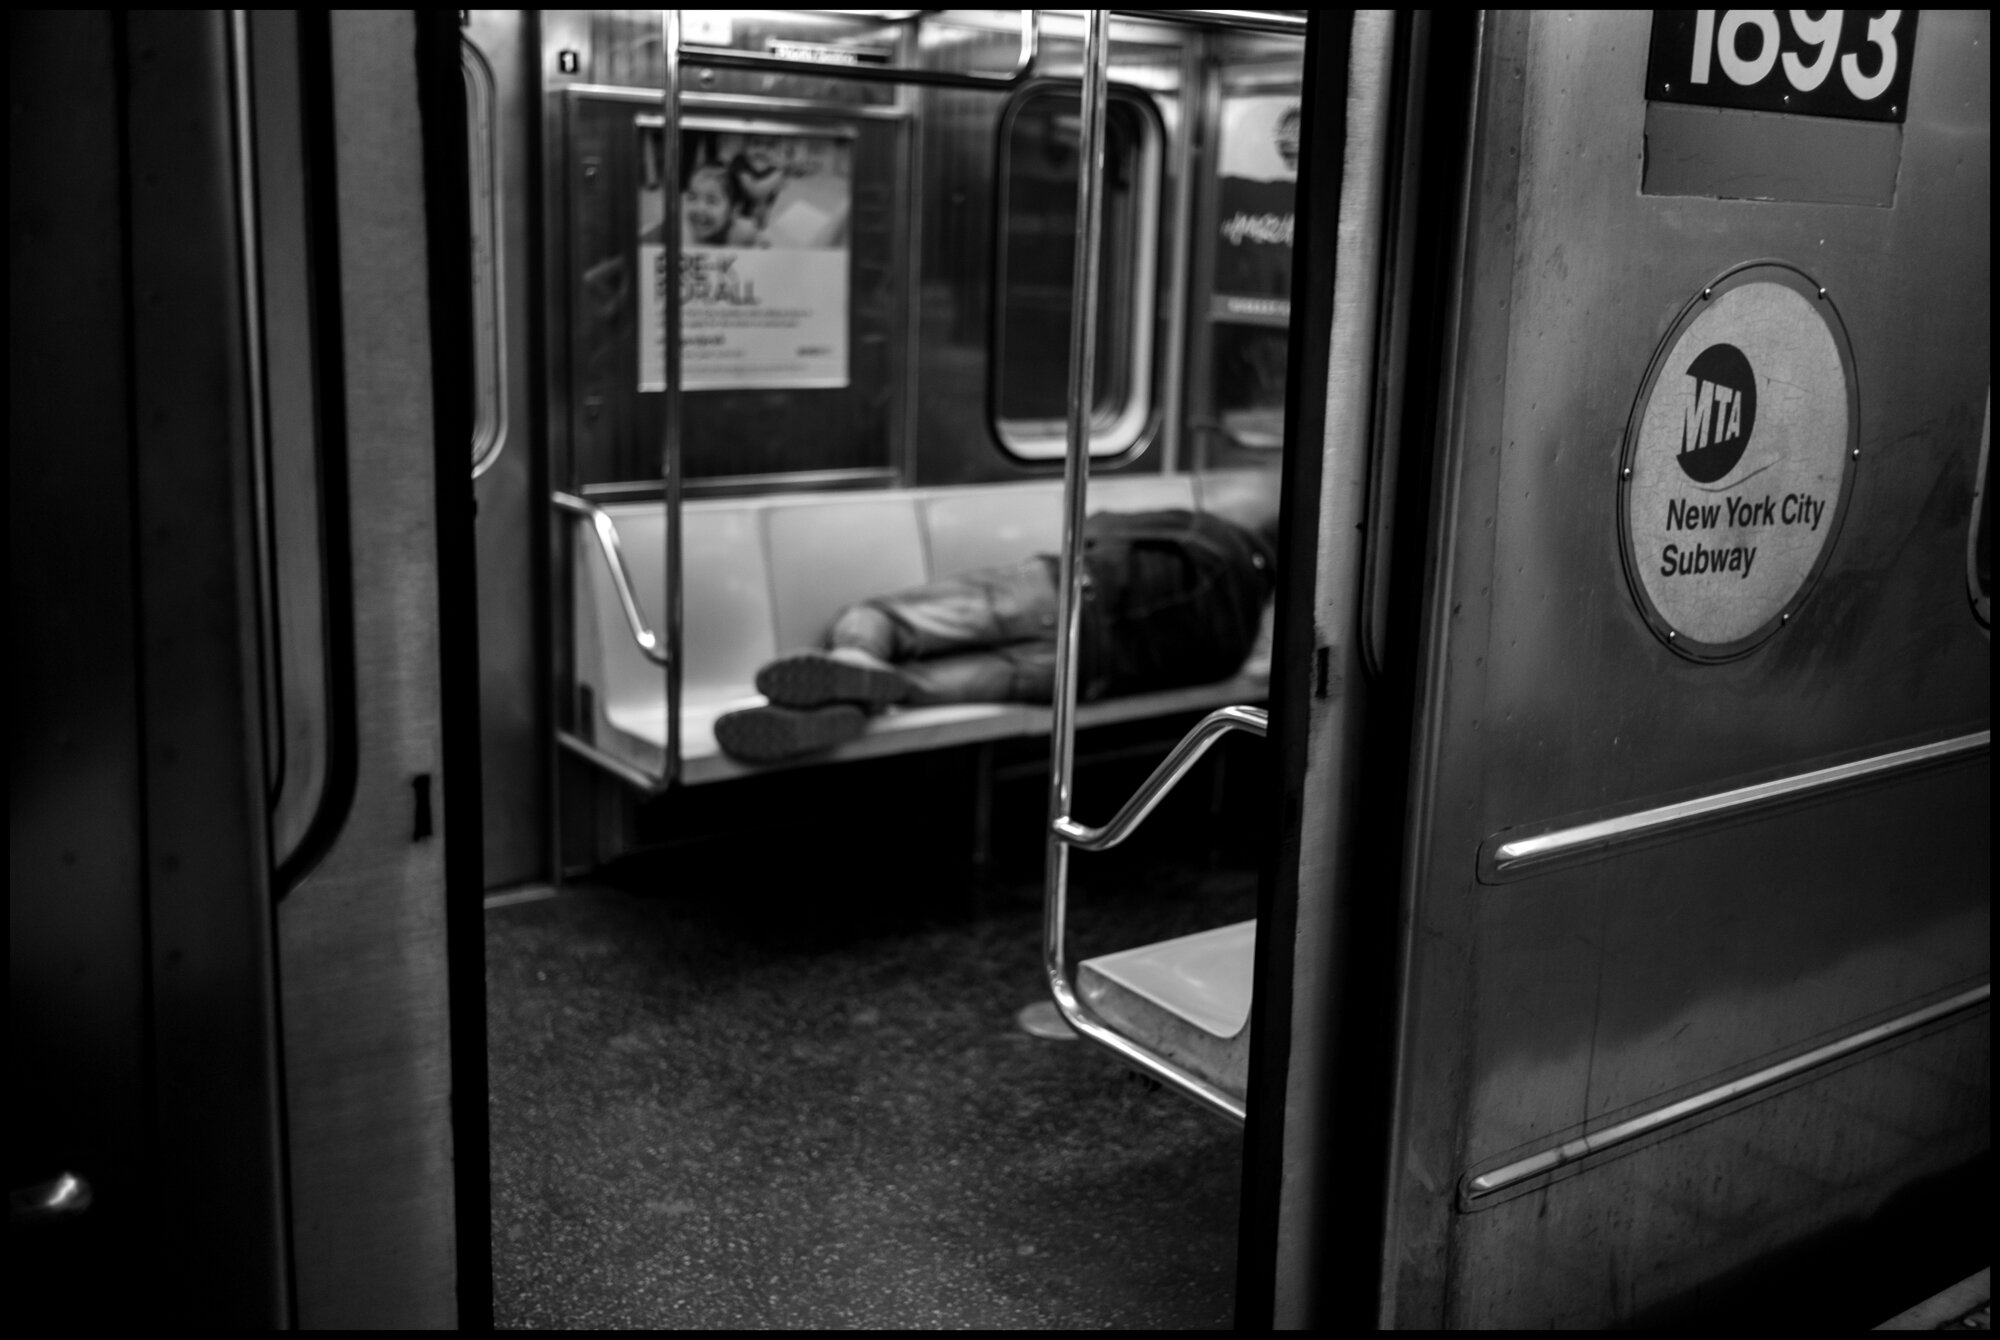  A homeless man finds shelter for sleep on a train at the Times Square Station.   March 20, 2020. © Peter Turnley.   ID# 01-014 